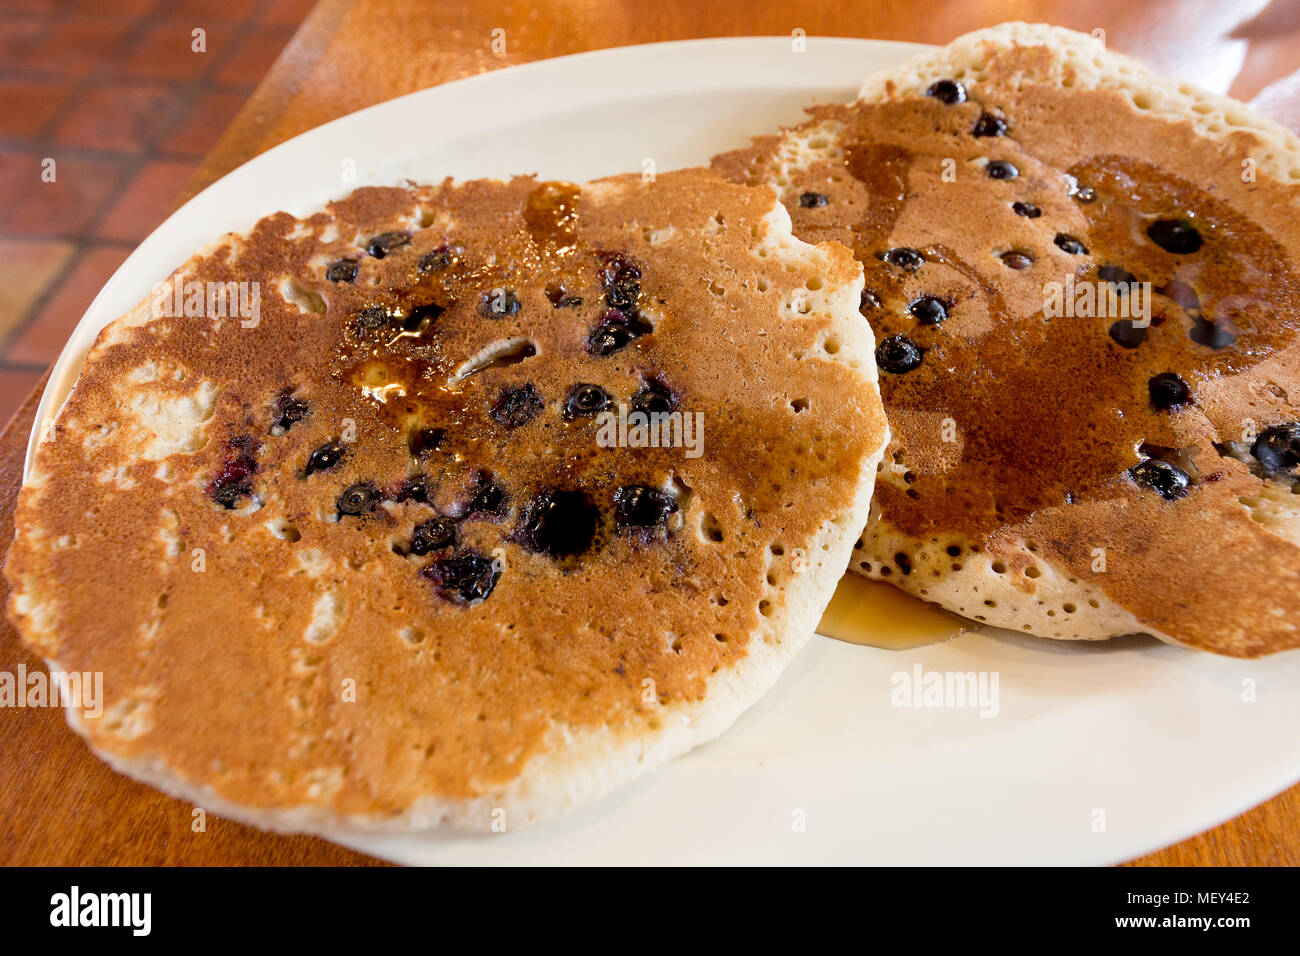 Blueberry pancakes with maple syrup for a traditional american breakfast , Texas USA Stock Photo